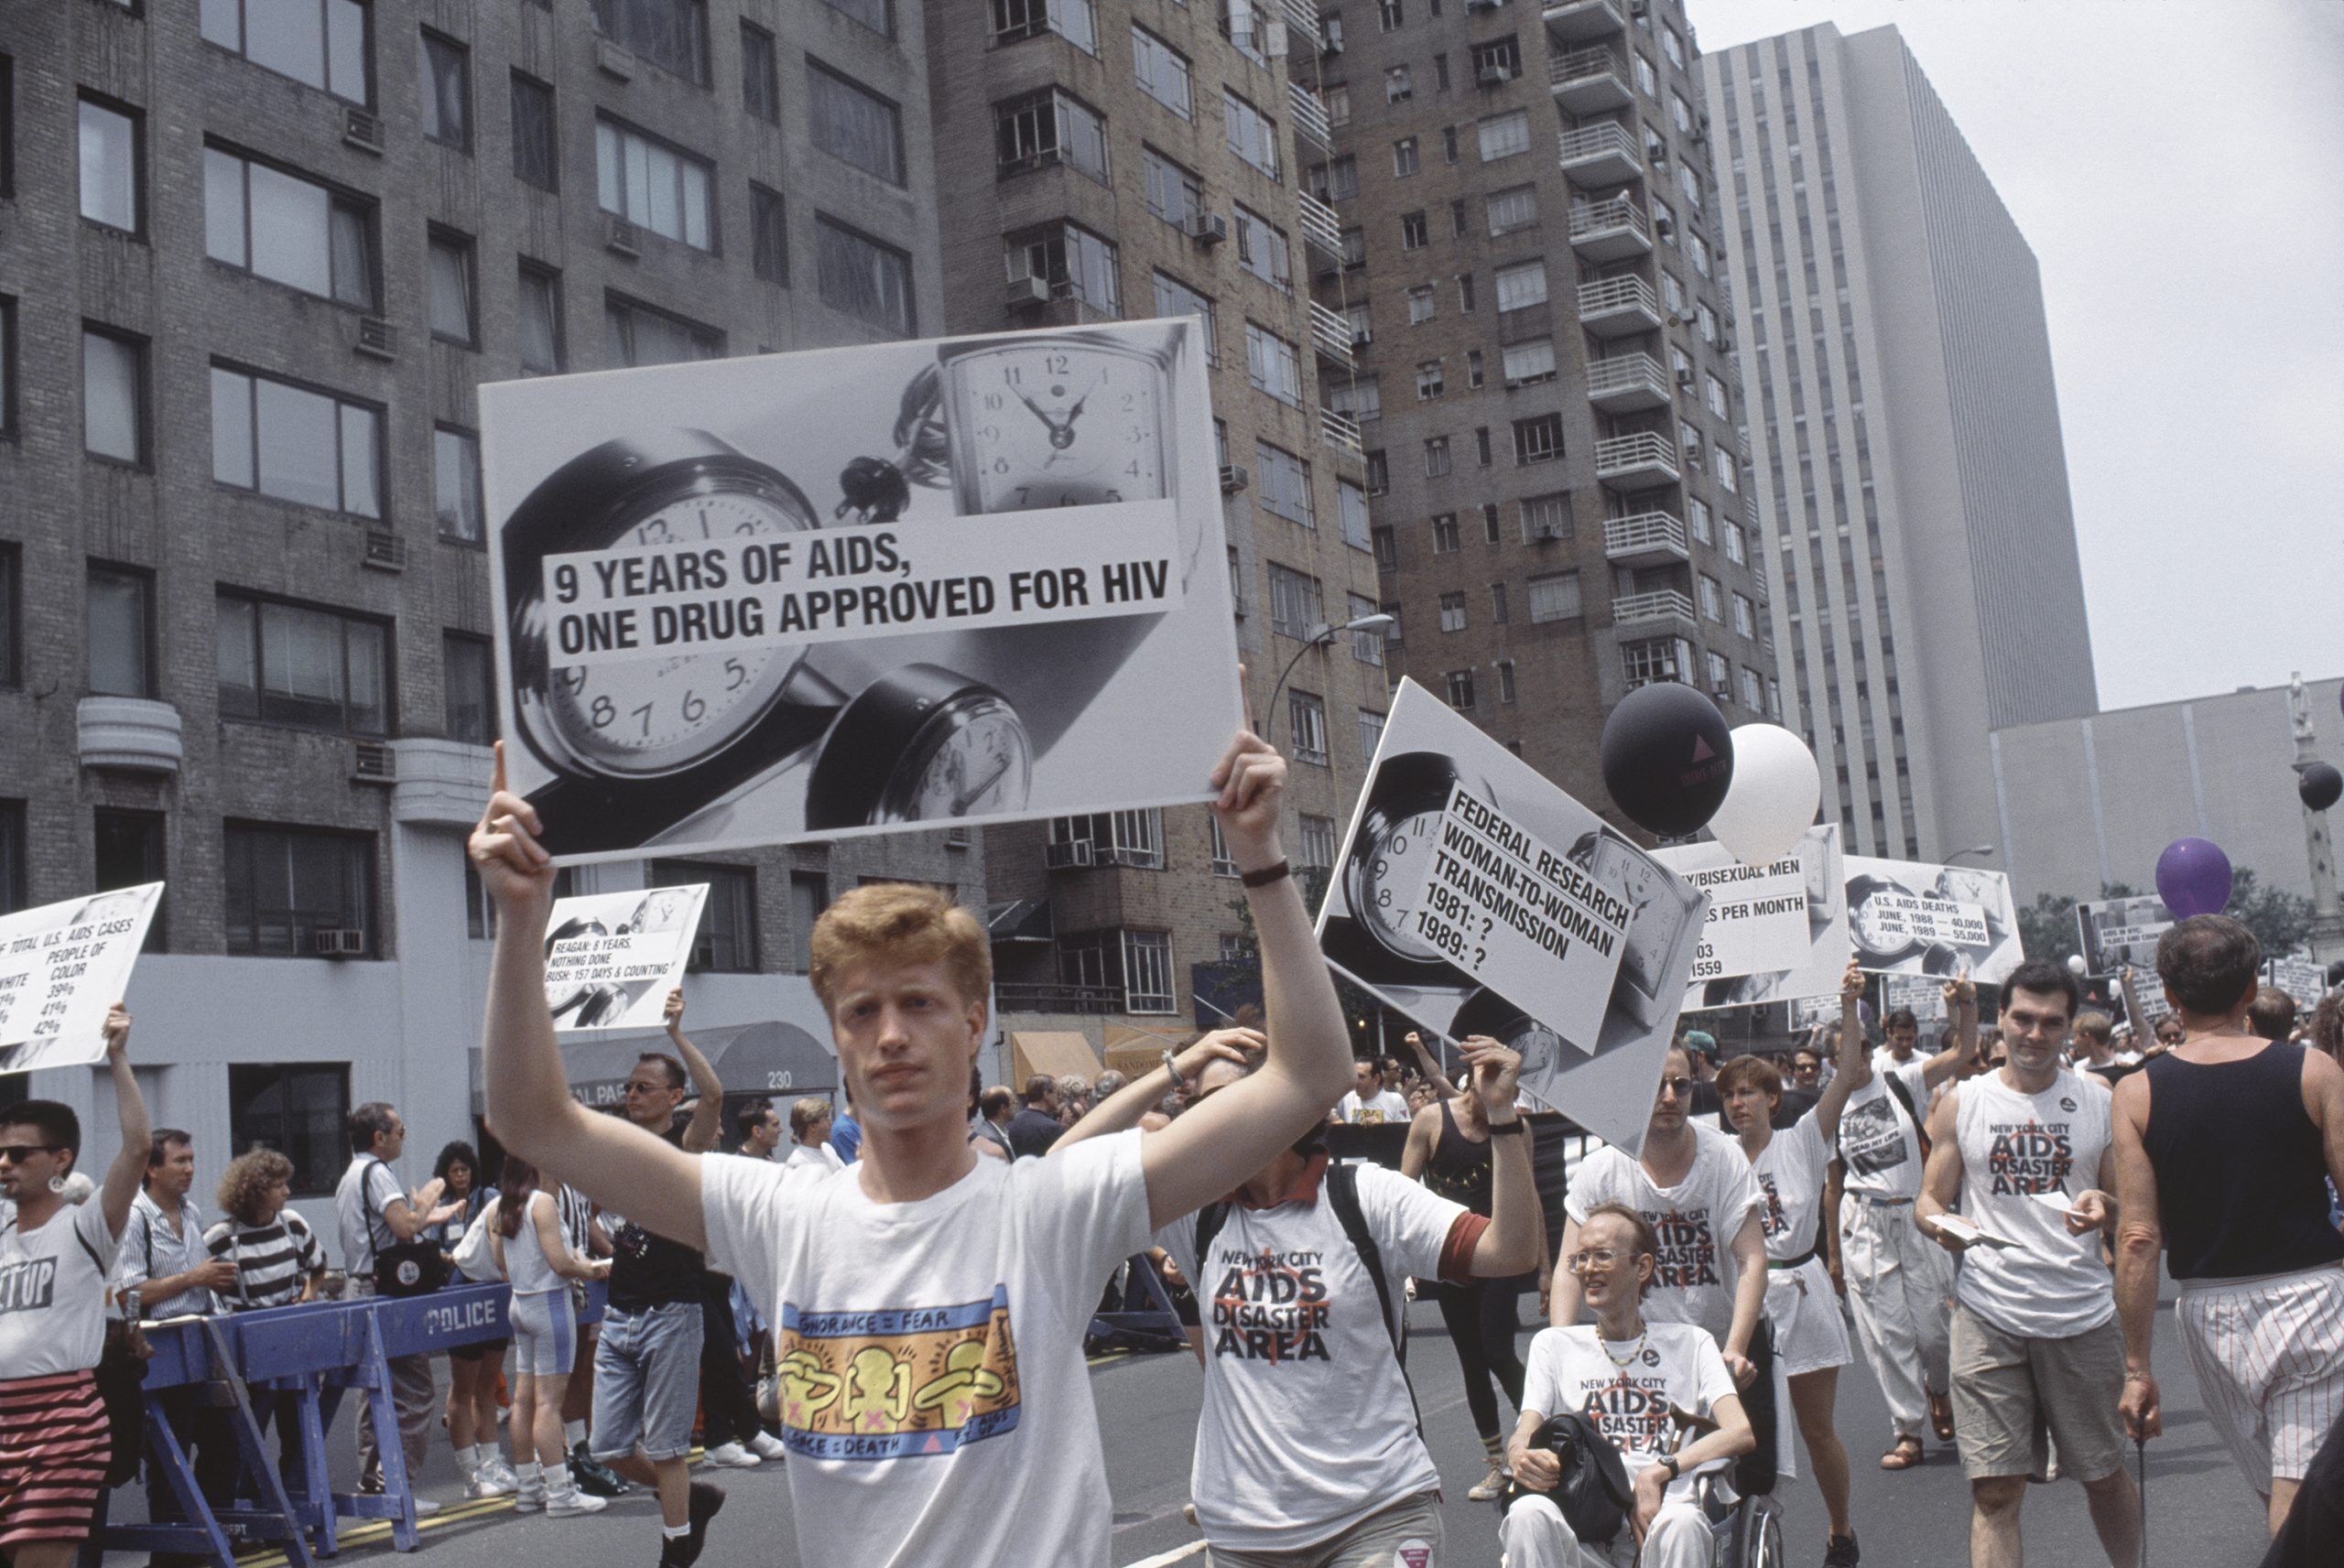 New York, New York, USA - Sunday, June 25, 1989: Marchers at the Lesbian and Gay Pride Parade, Sunday, June 25, 1989 in New York, New York, USA carry signs '9 years of AIDS, One drug approved for HIV.'